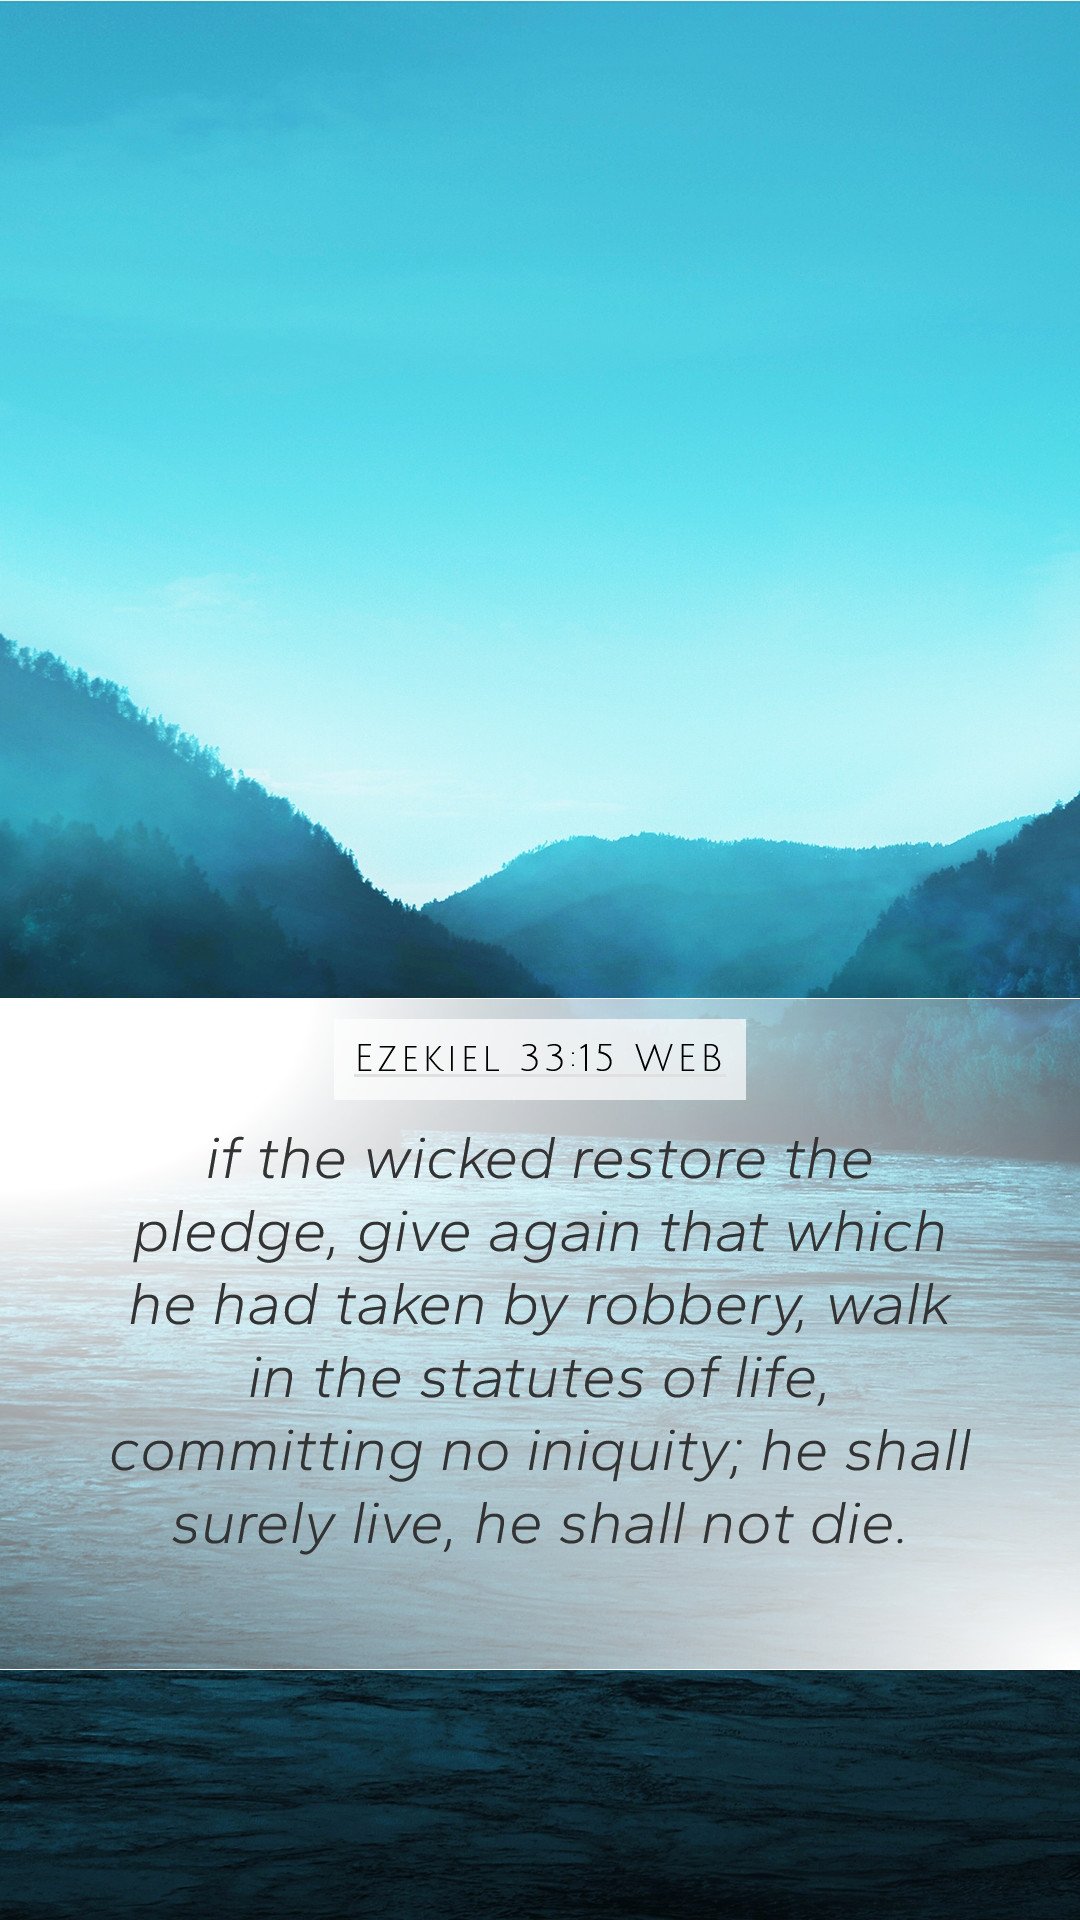 Ezekiel 33:15 WEB Mobile Phone Wallpaper the wicked restore the pledge, give again that